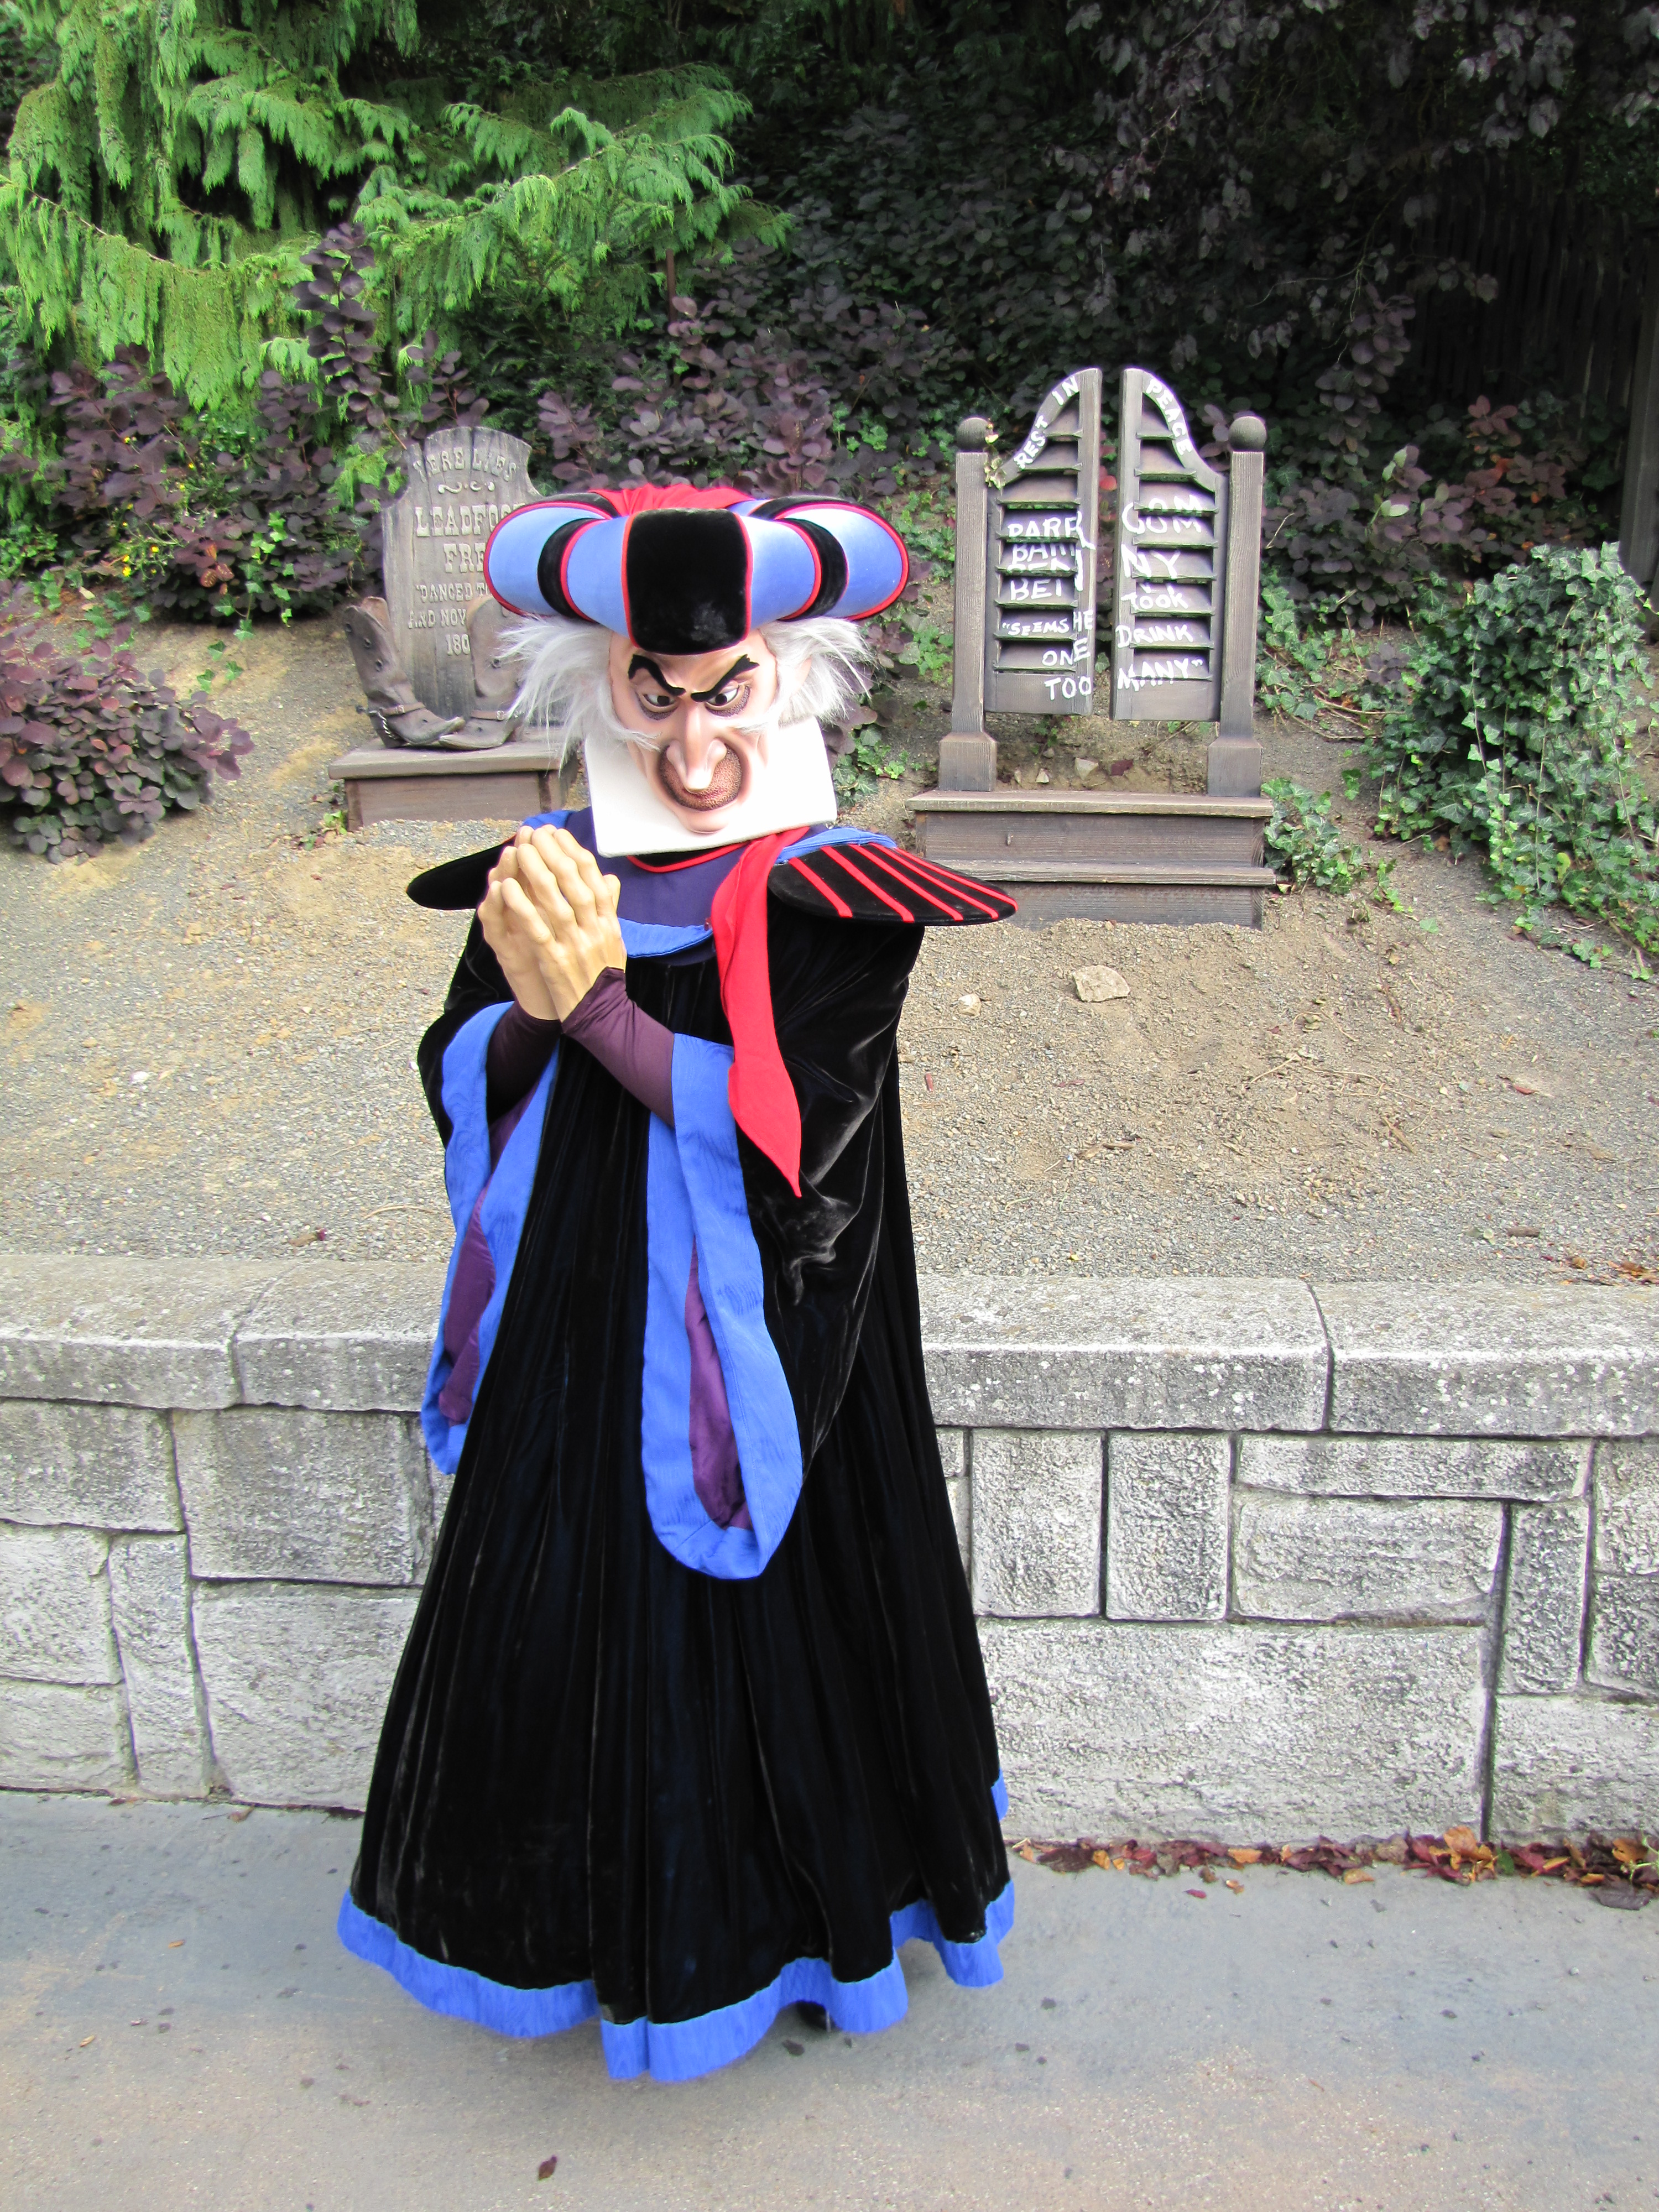 Frollo can be found during the Halloween Season at the Disneyland Park